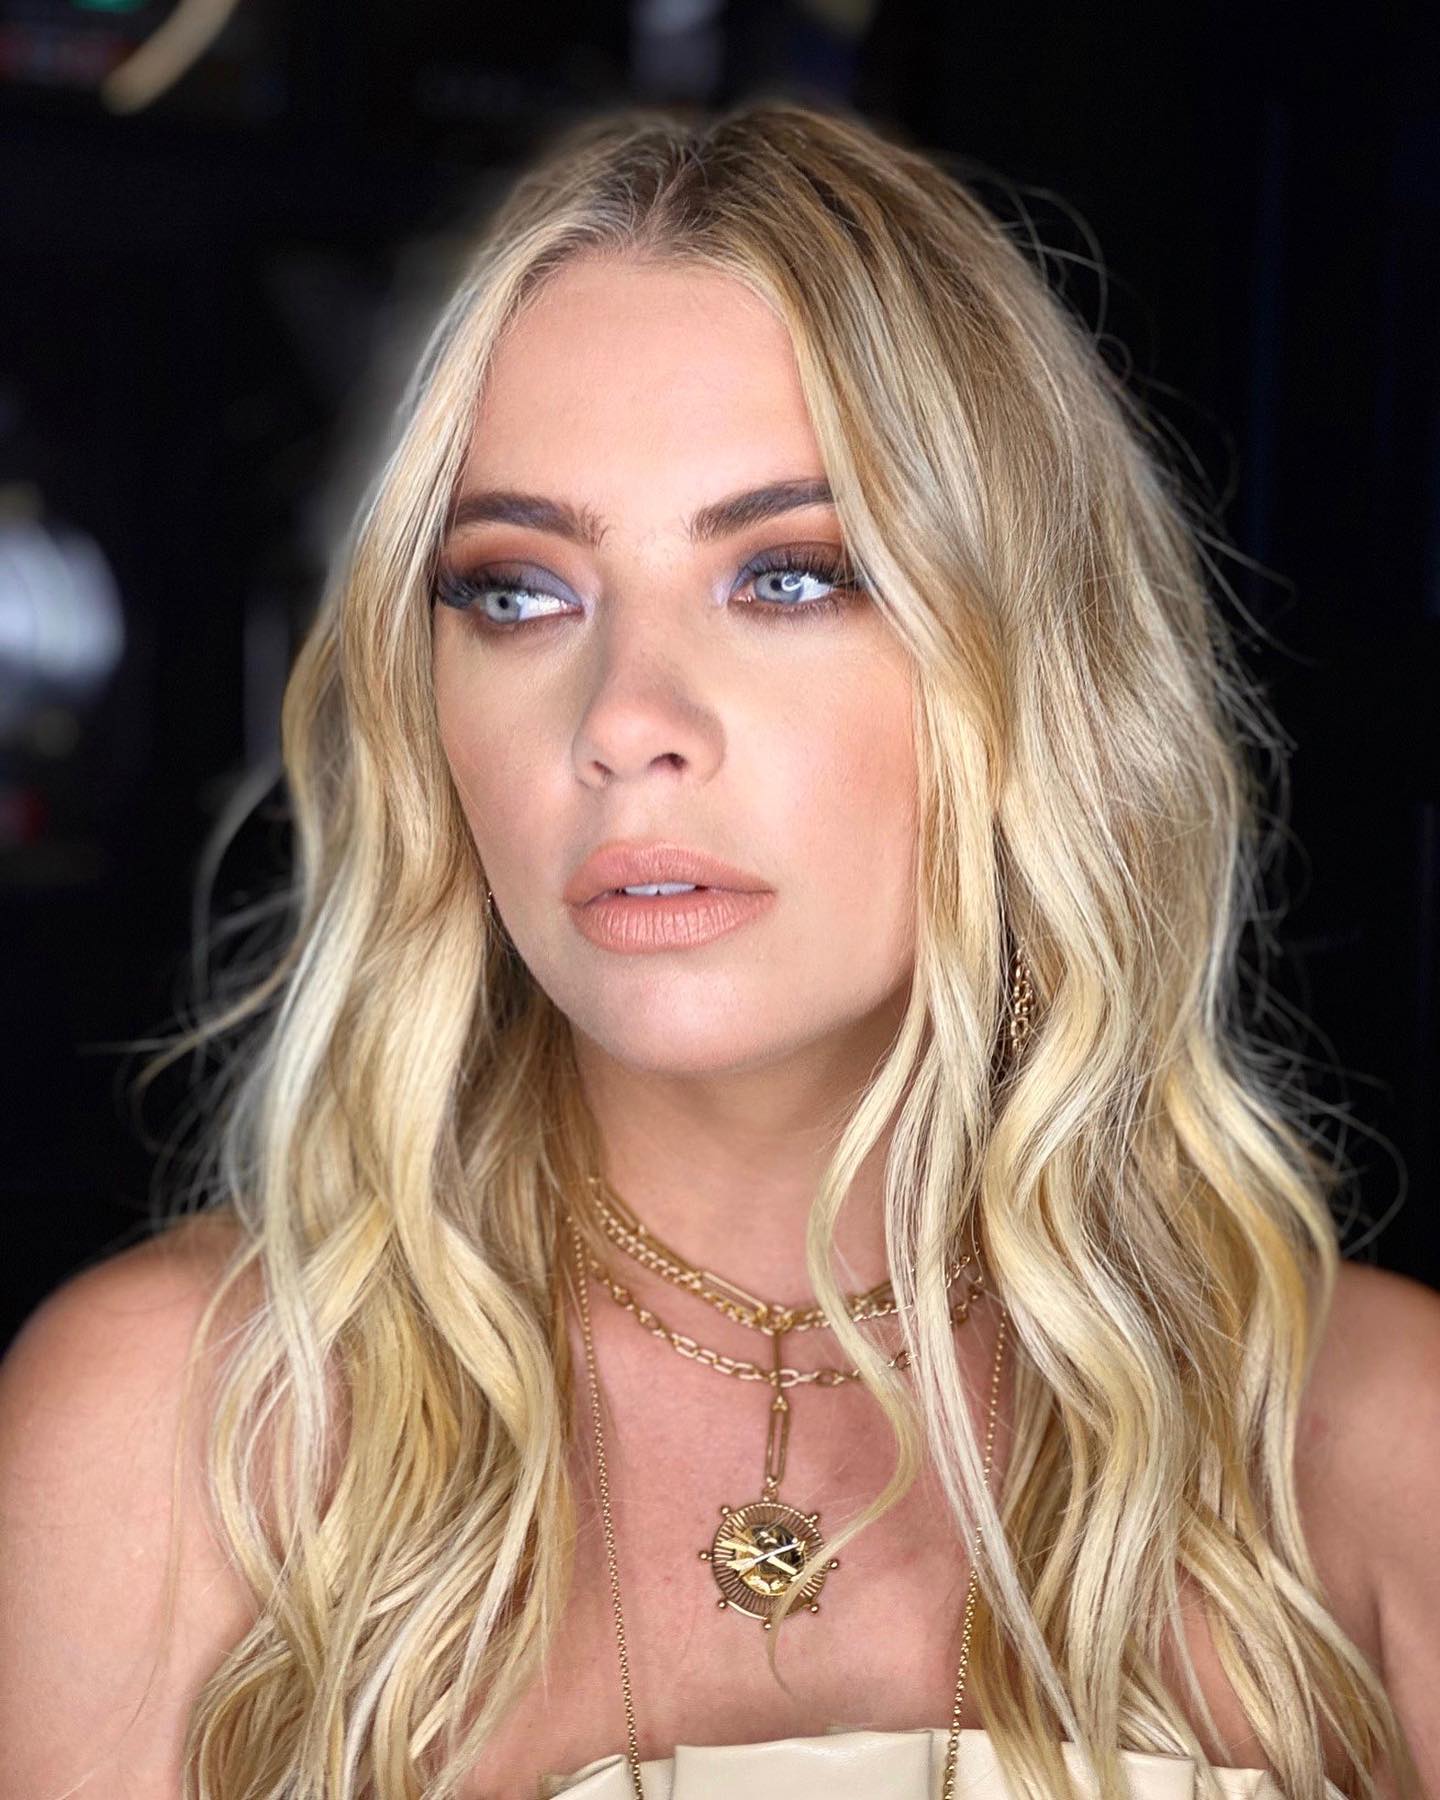 Ashley Benson Gets Ready for Prom!